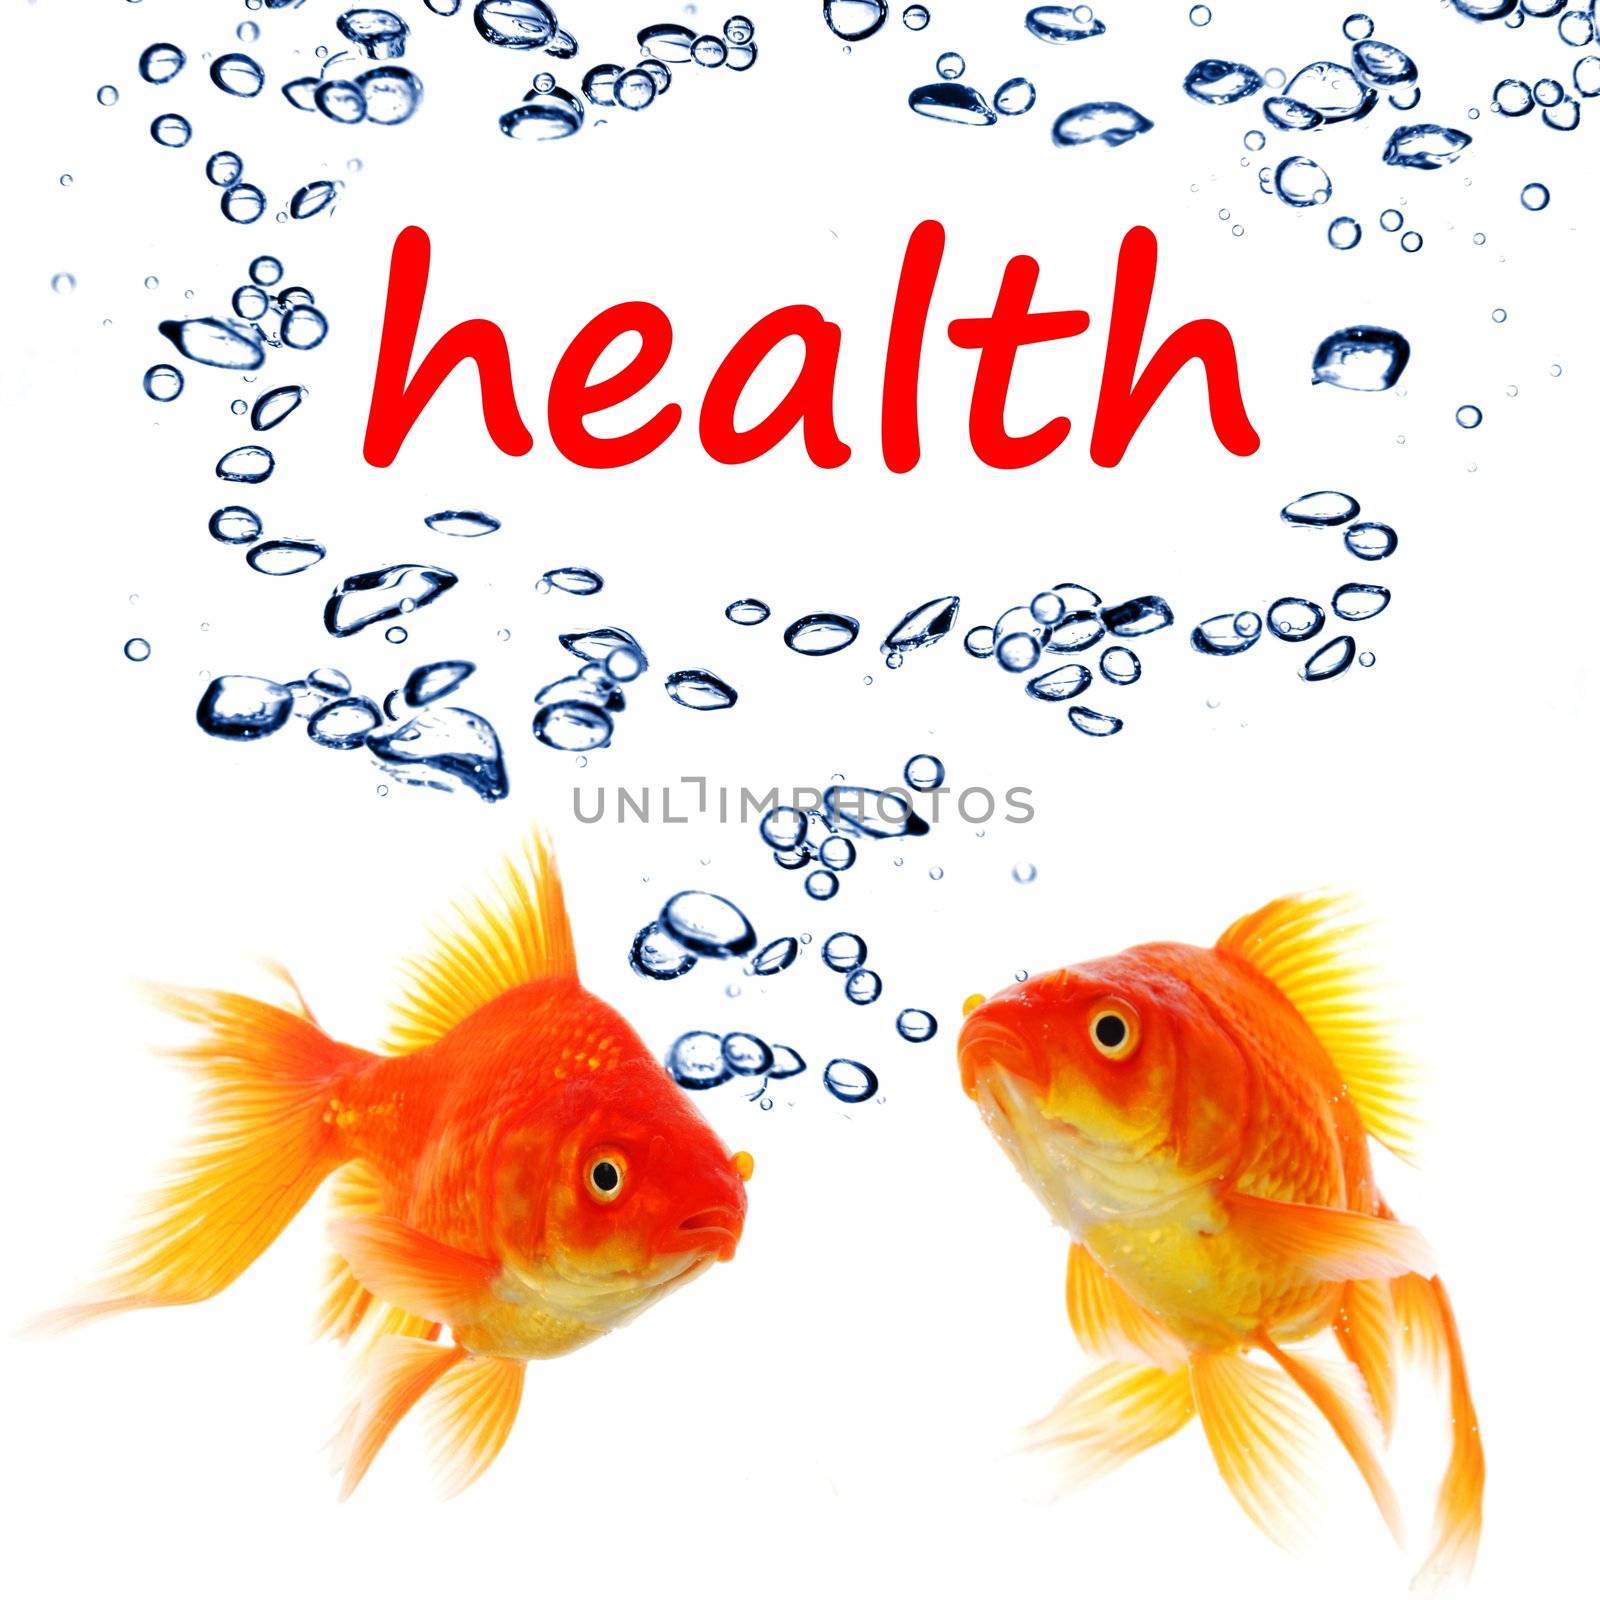 word health and goldfish showing spa or healthy lifestyle concept